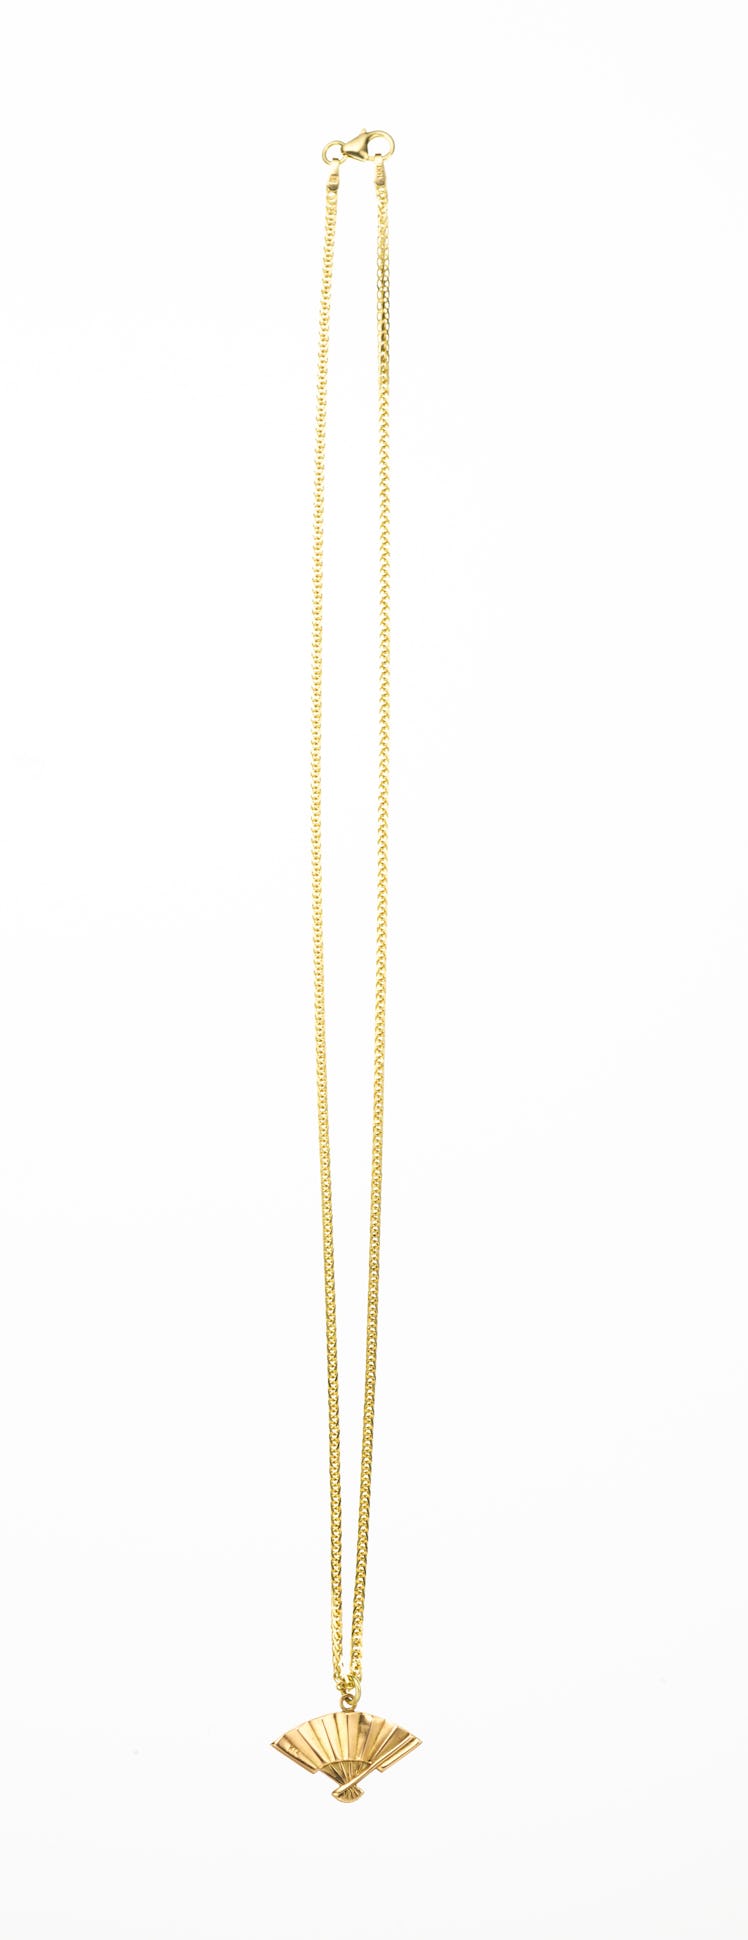 The Row golden necklace with a hand fan-shaped pendant.